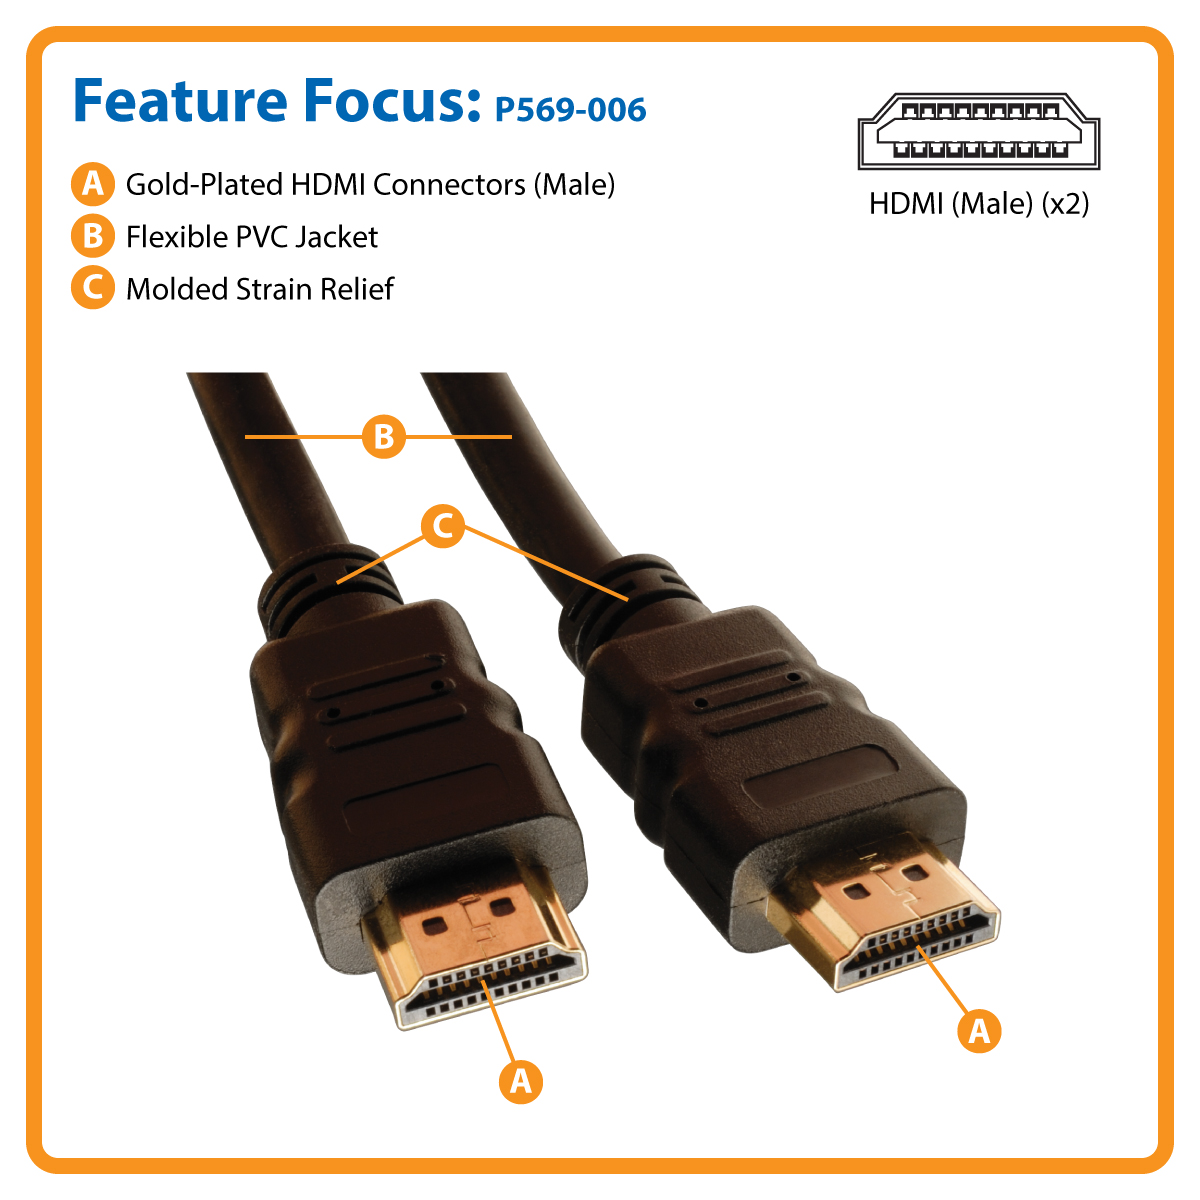 Tripp Lite 6ft High Speed HDMI Cable Digital Video with Audio 4K x 2K M/M  6' - HDMI cable - 6 ft